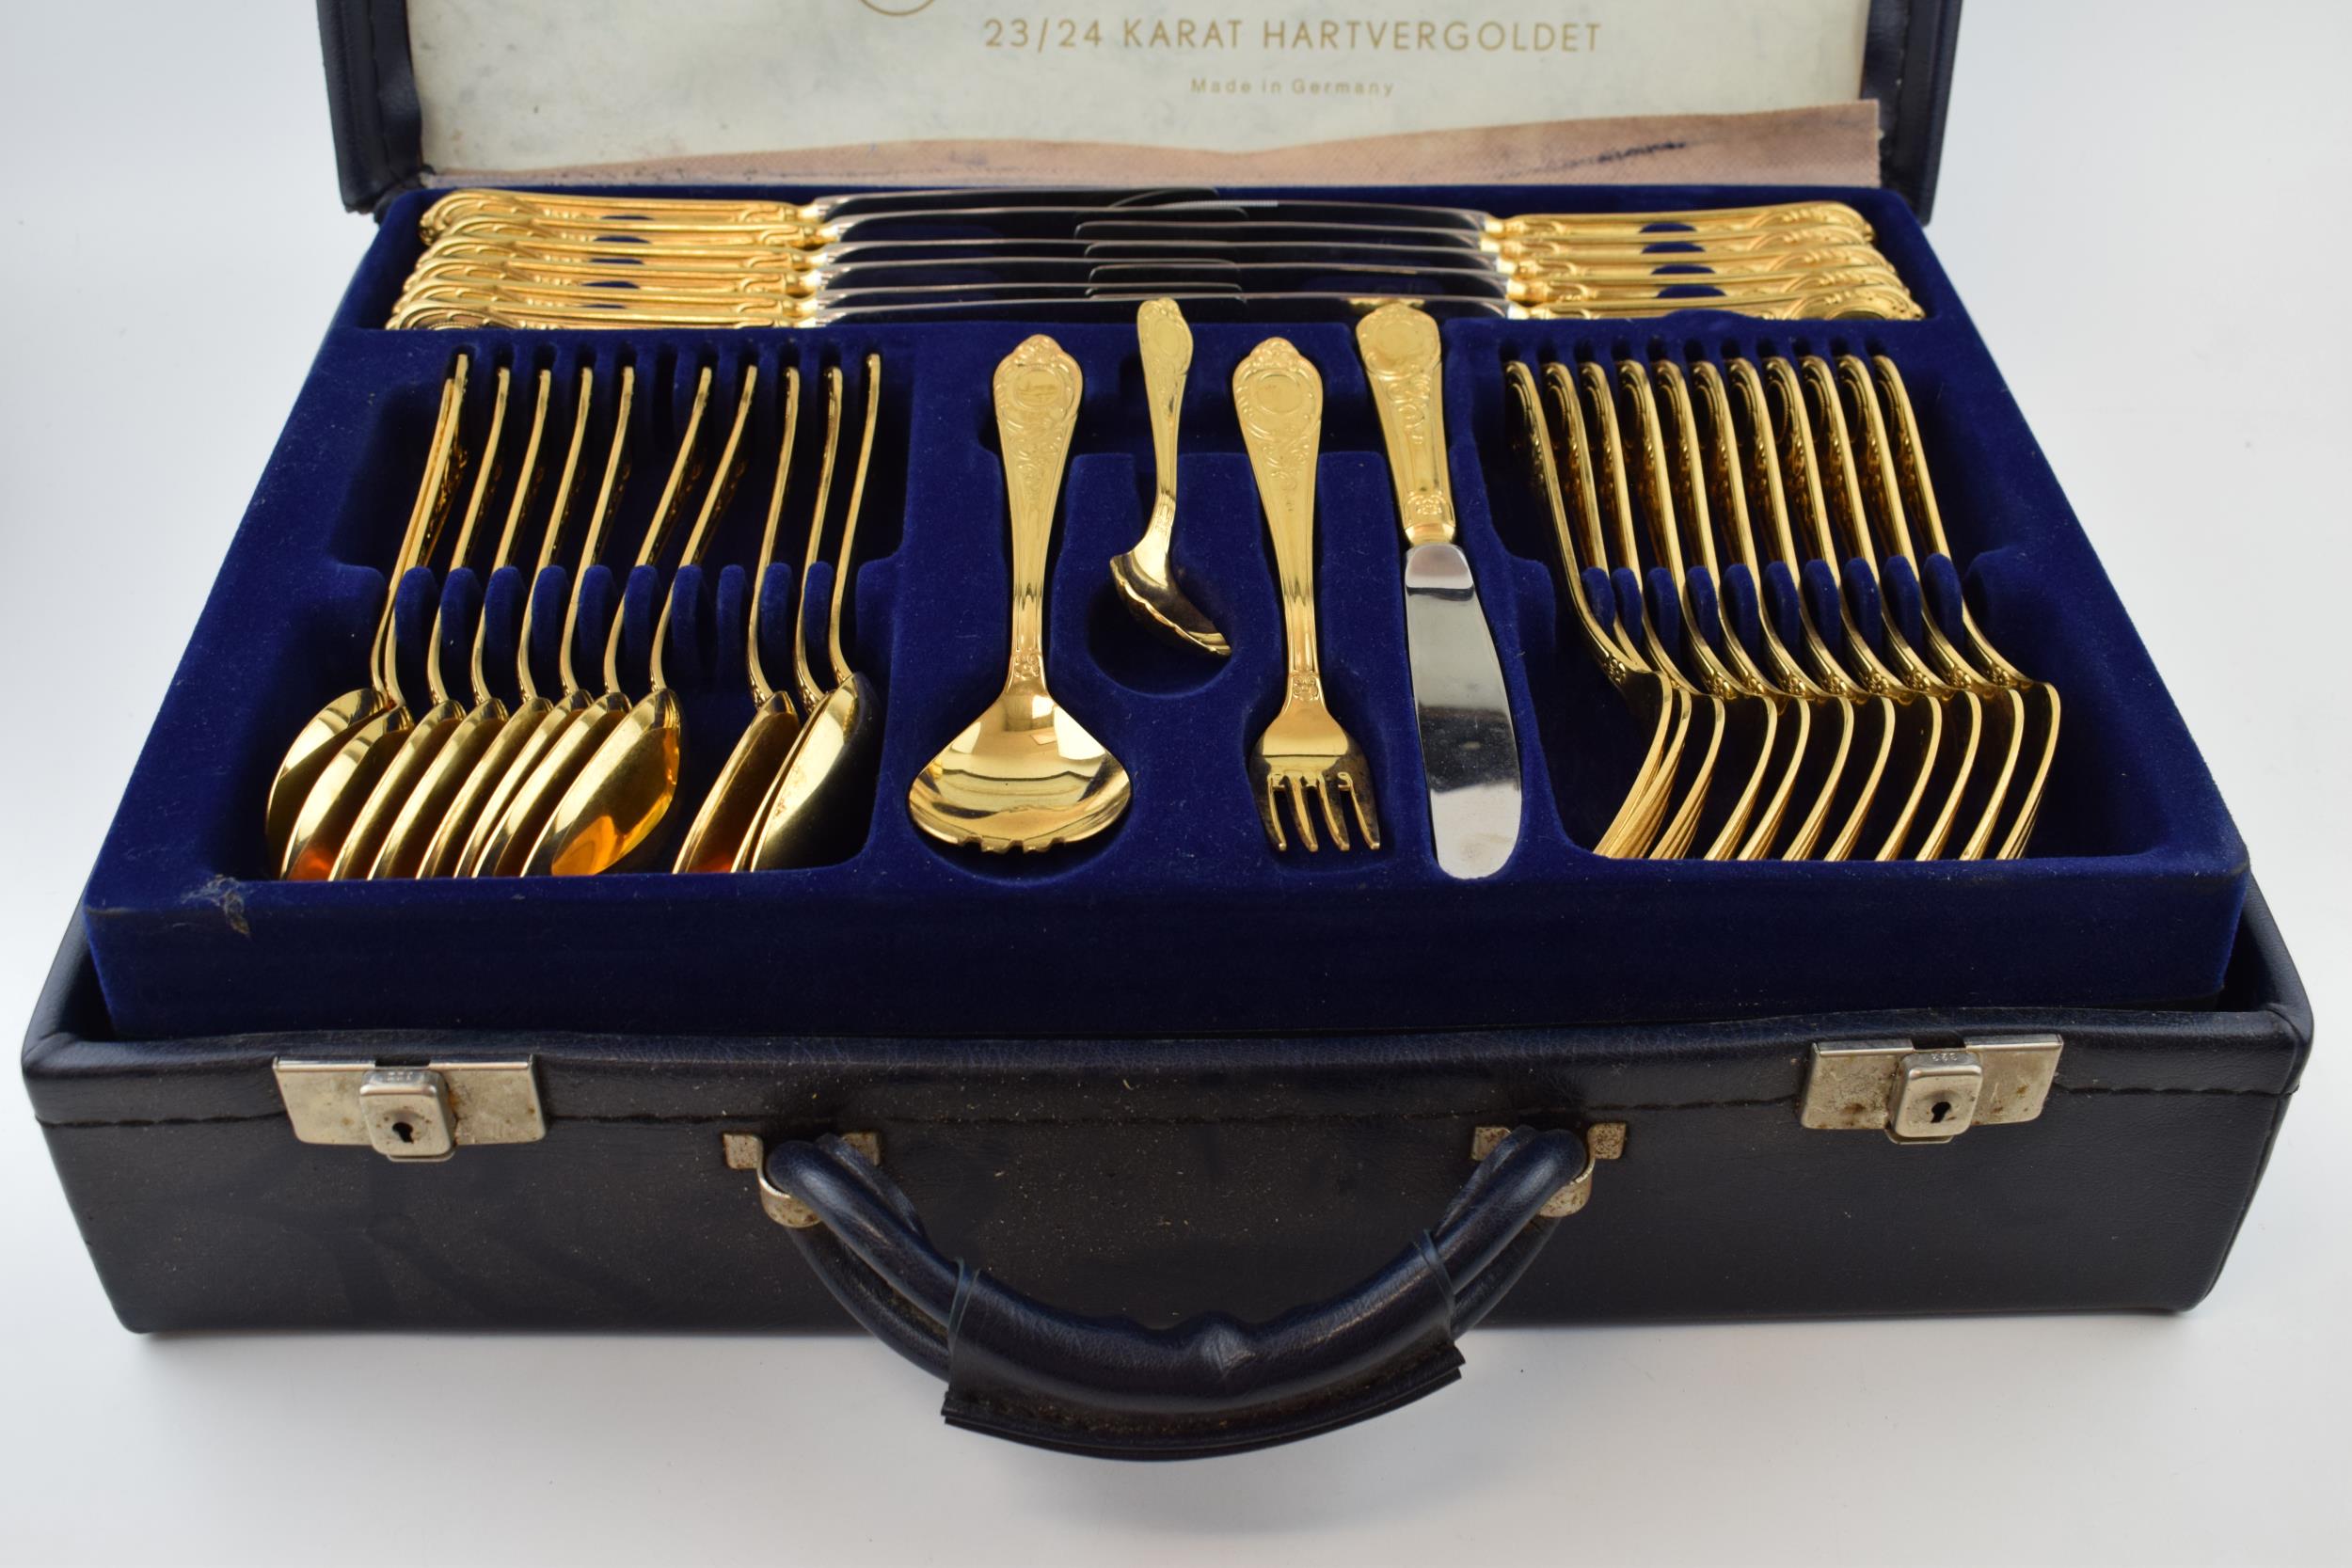 A cased Solingen 24k gold plated cutlery set, in leather brief case, with 3 trays of cutlery, all in